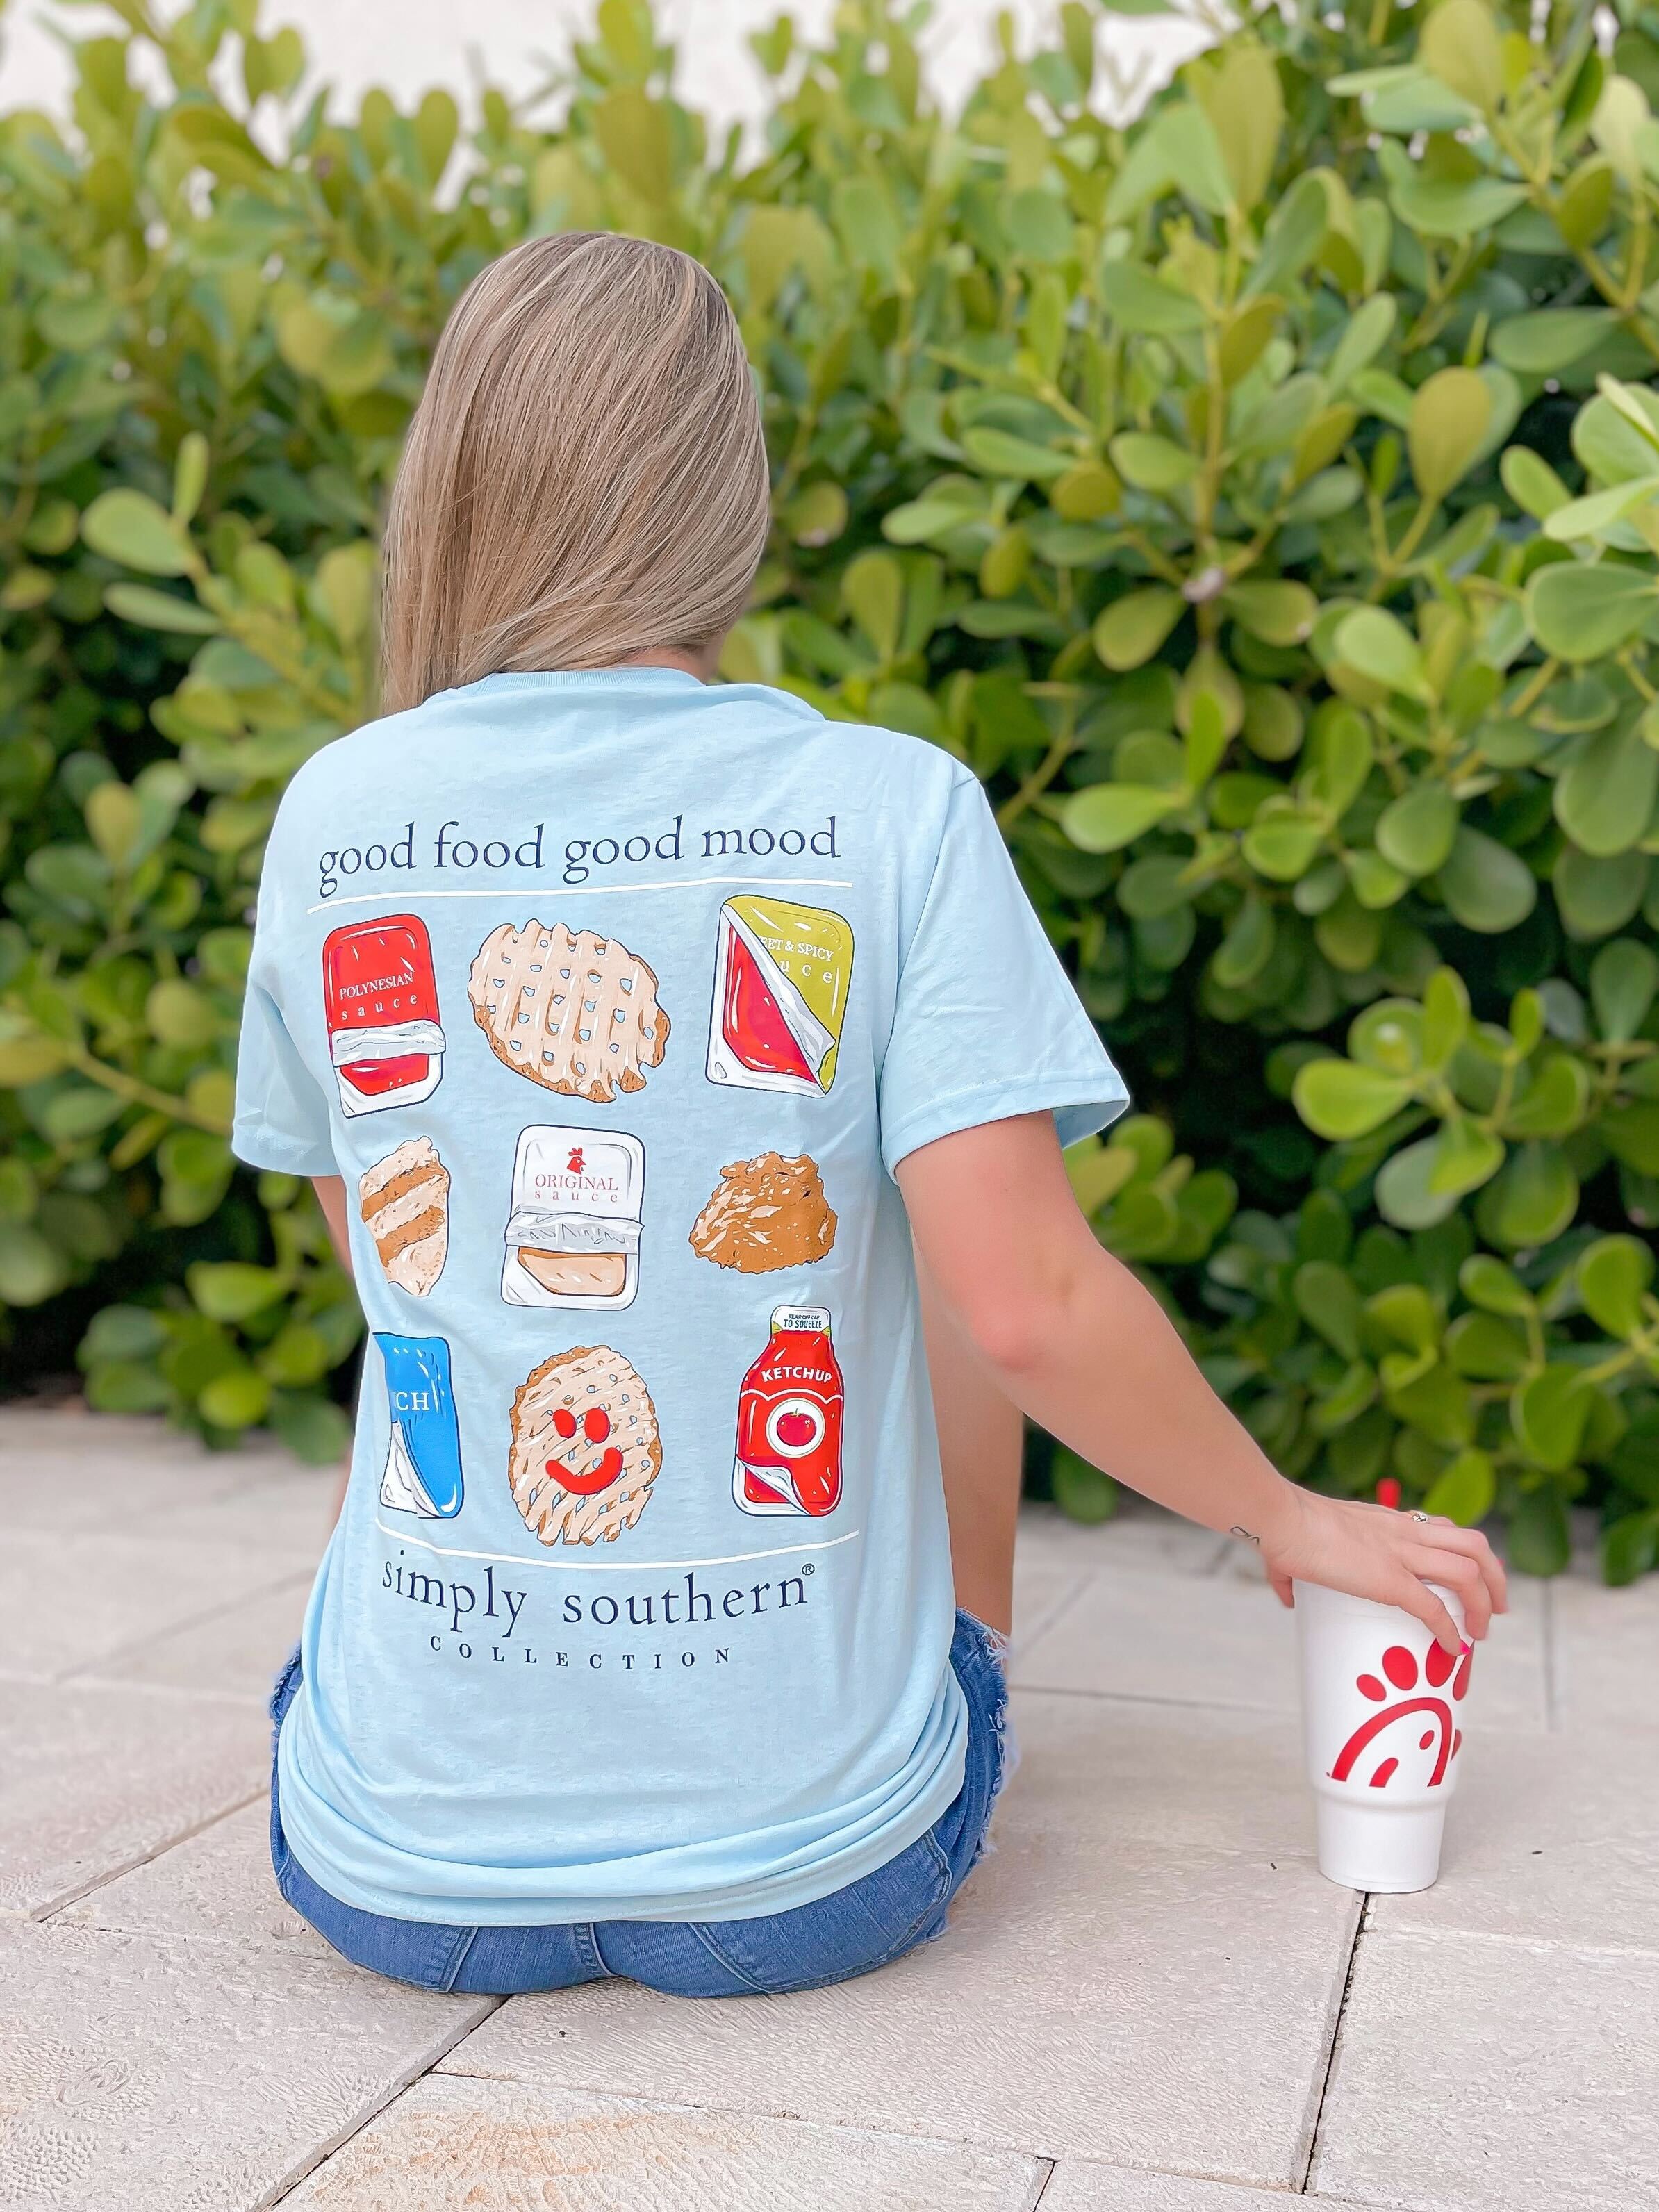 'Good Food Good Mood' Chicken Short Sleeve Tee by Simply Southern